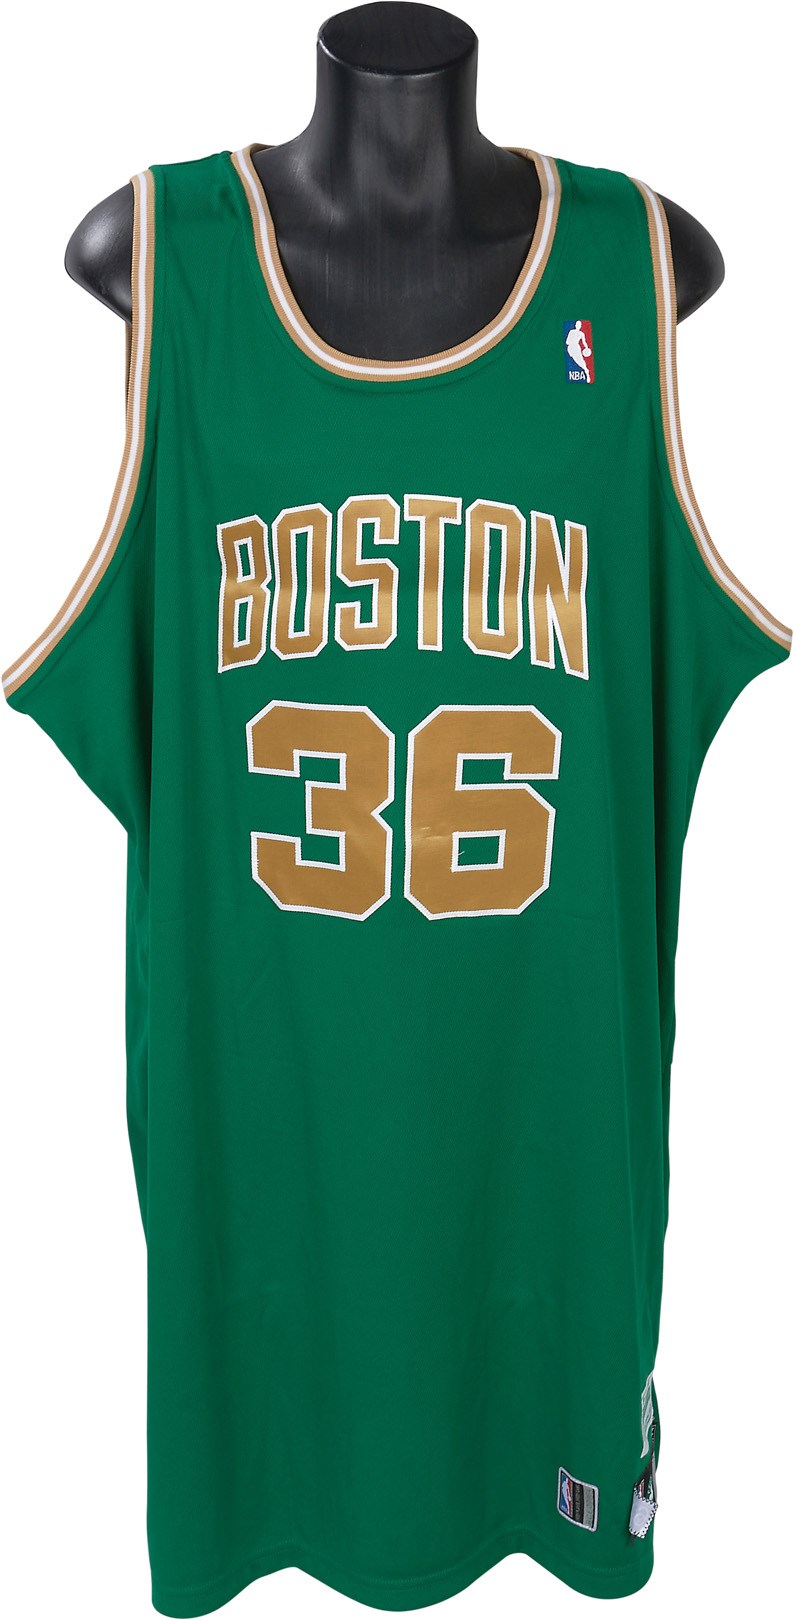 - 2010-11 Shaquille O'Neal St. Patrick's Day Boston Celtics Game Issued Signed Jersey (LOA Shaq's personal chef)